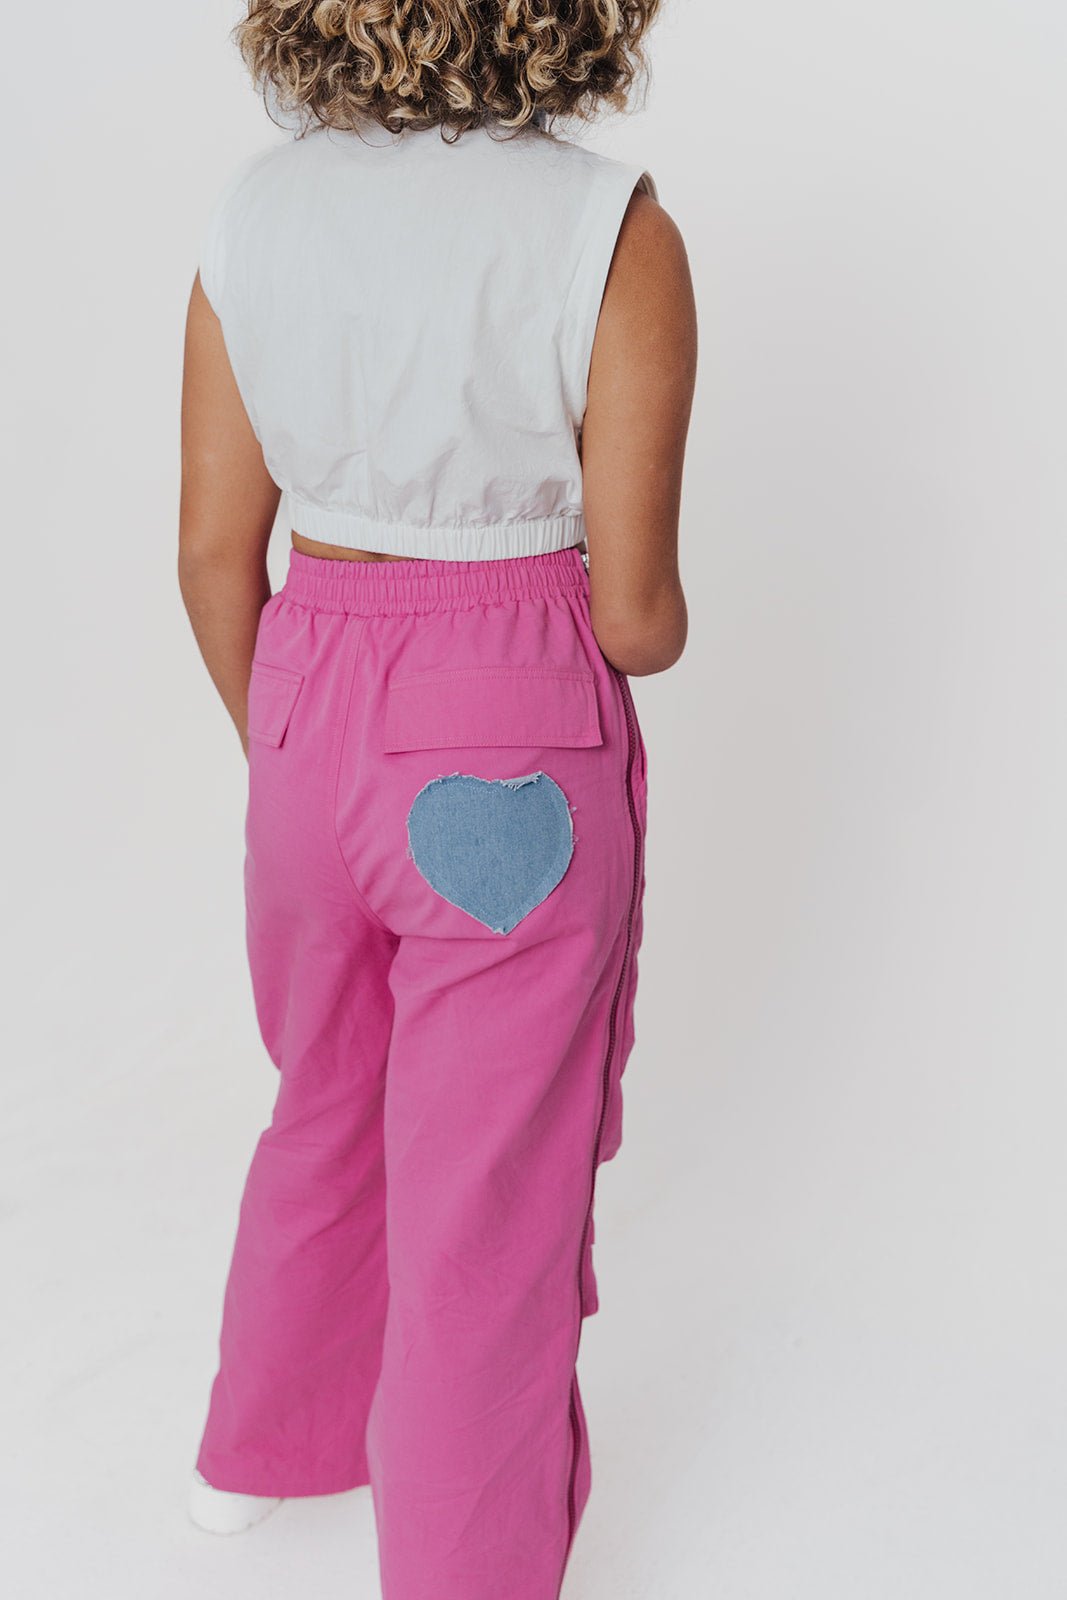 'Rebel with a Cause' Adaptive Cargo Pants - Lady Fines